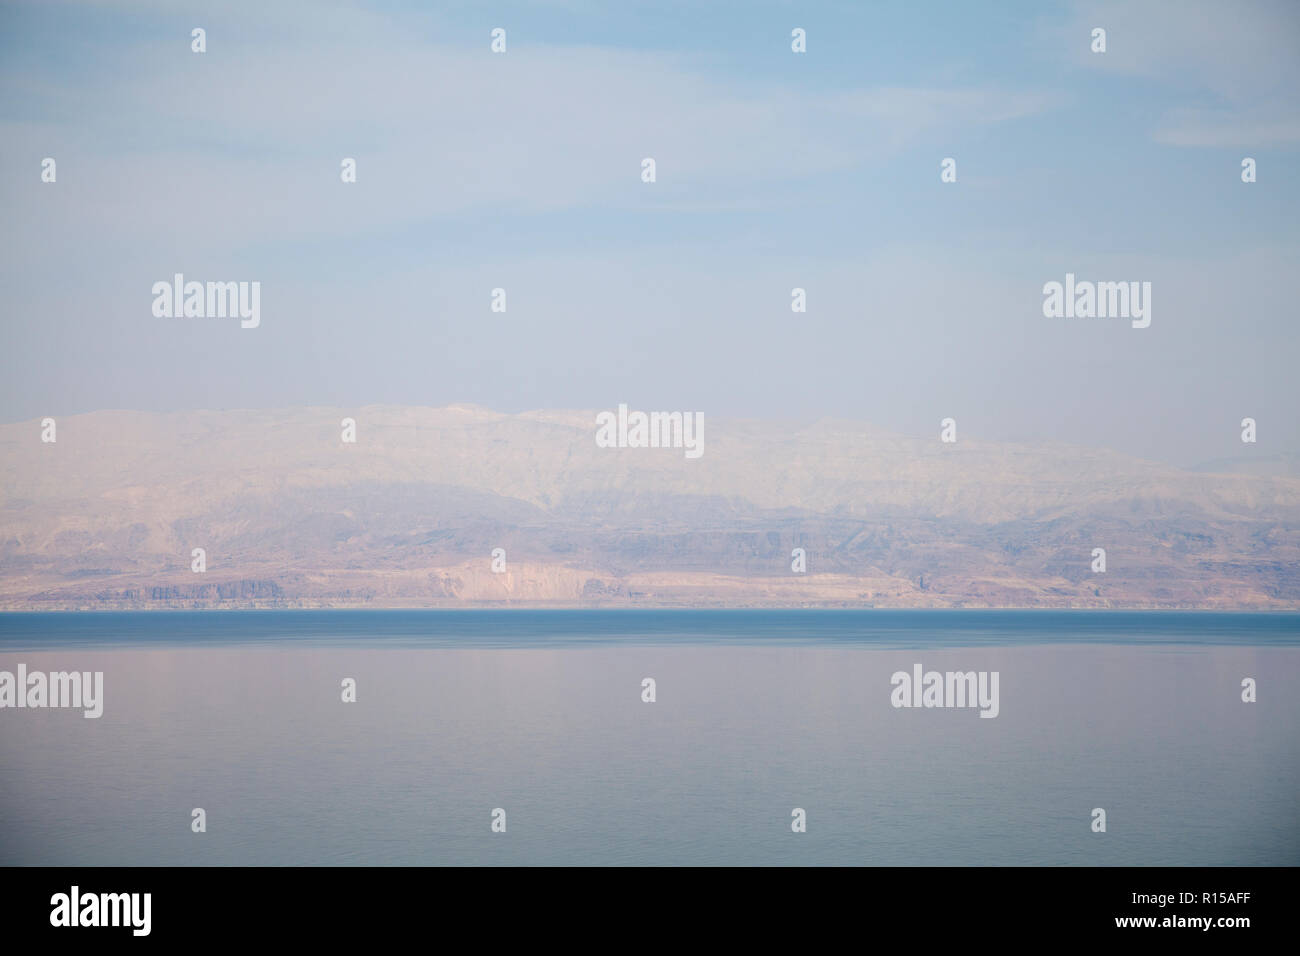 View of Dead Sea and Jordan Beyond From Israel Stock Photo